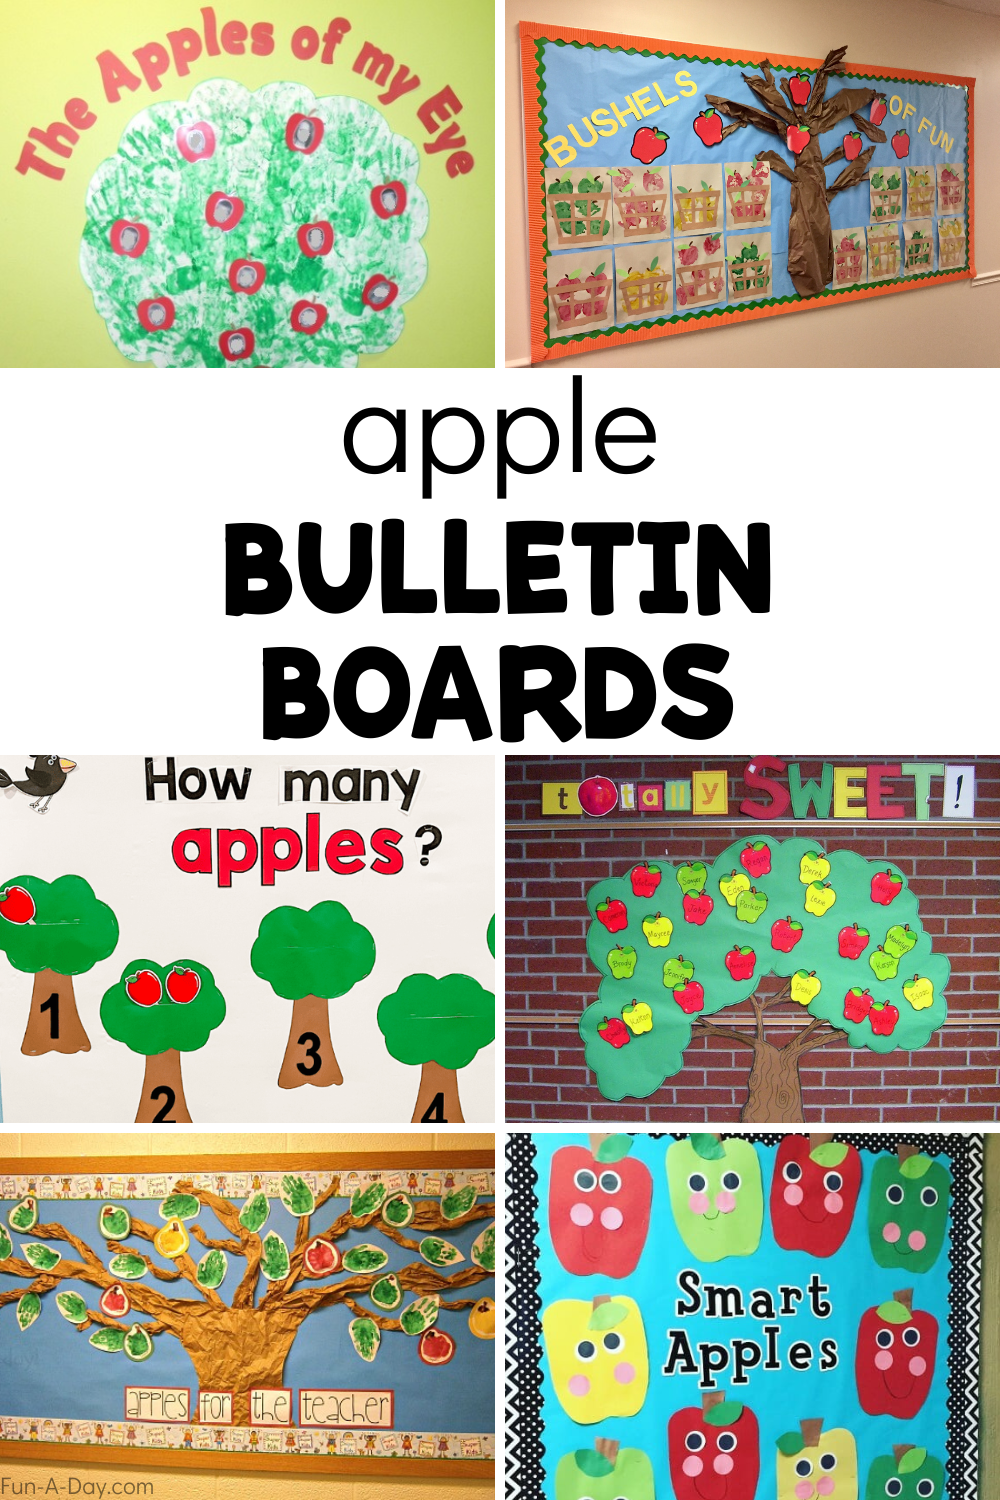 6 classroom display ideas with text that reads apple bulletin boards